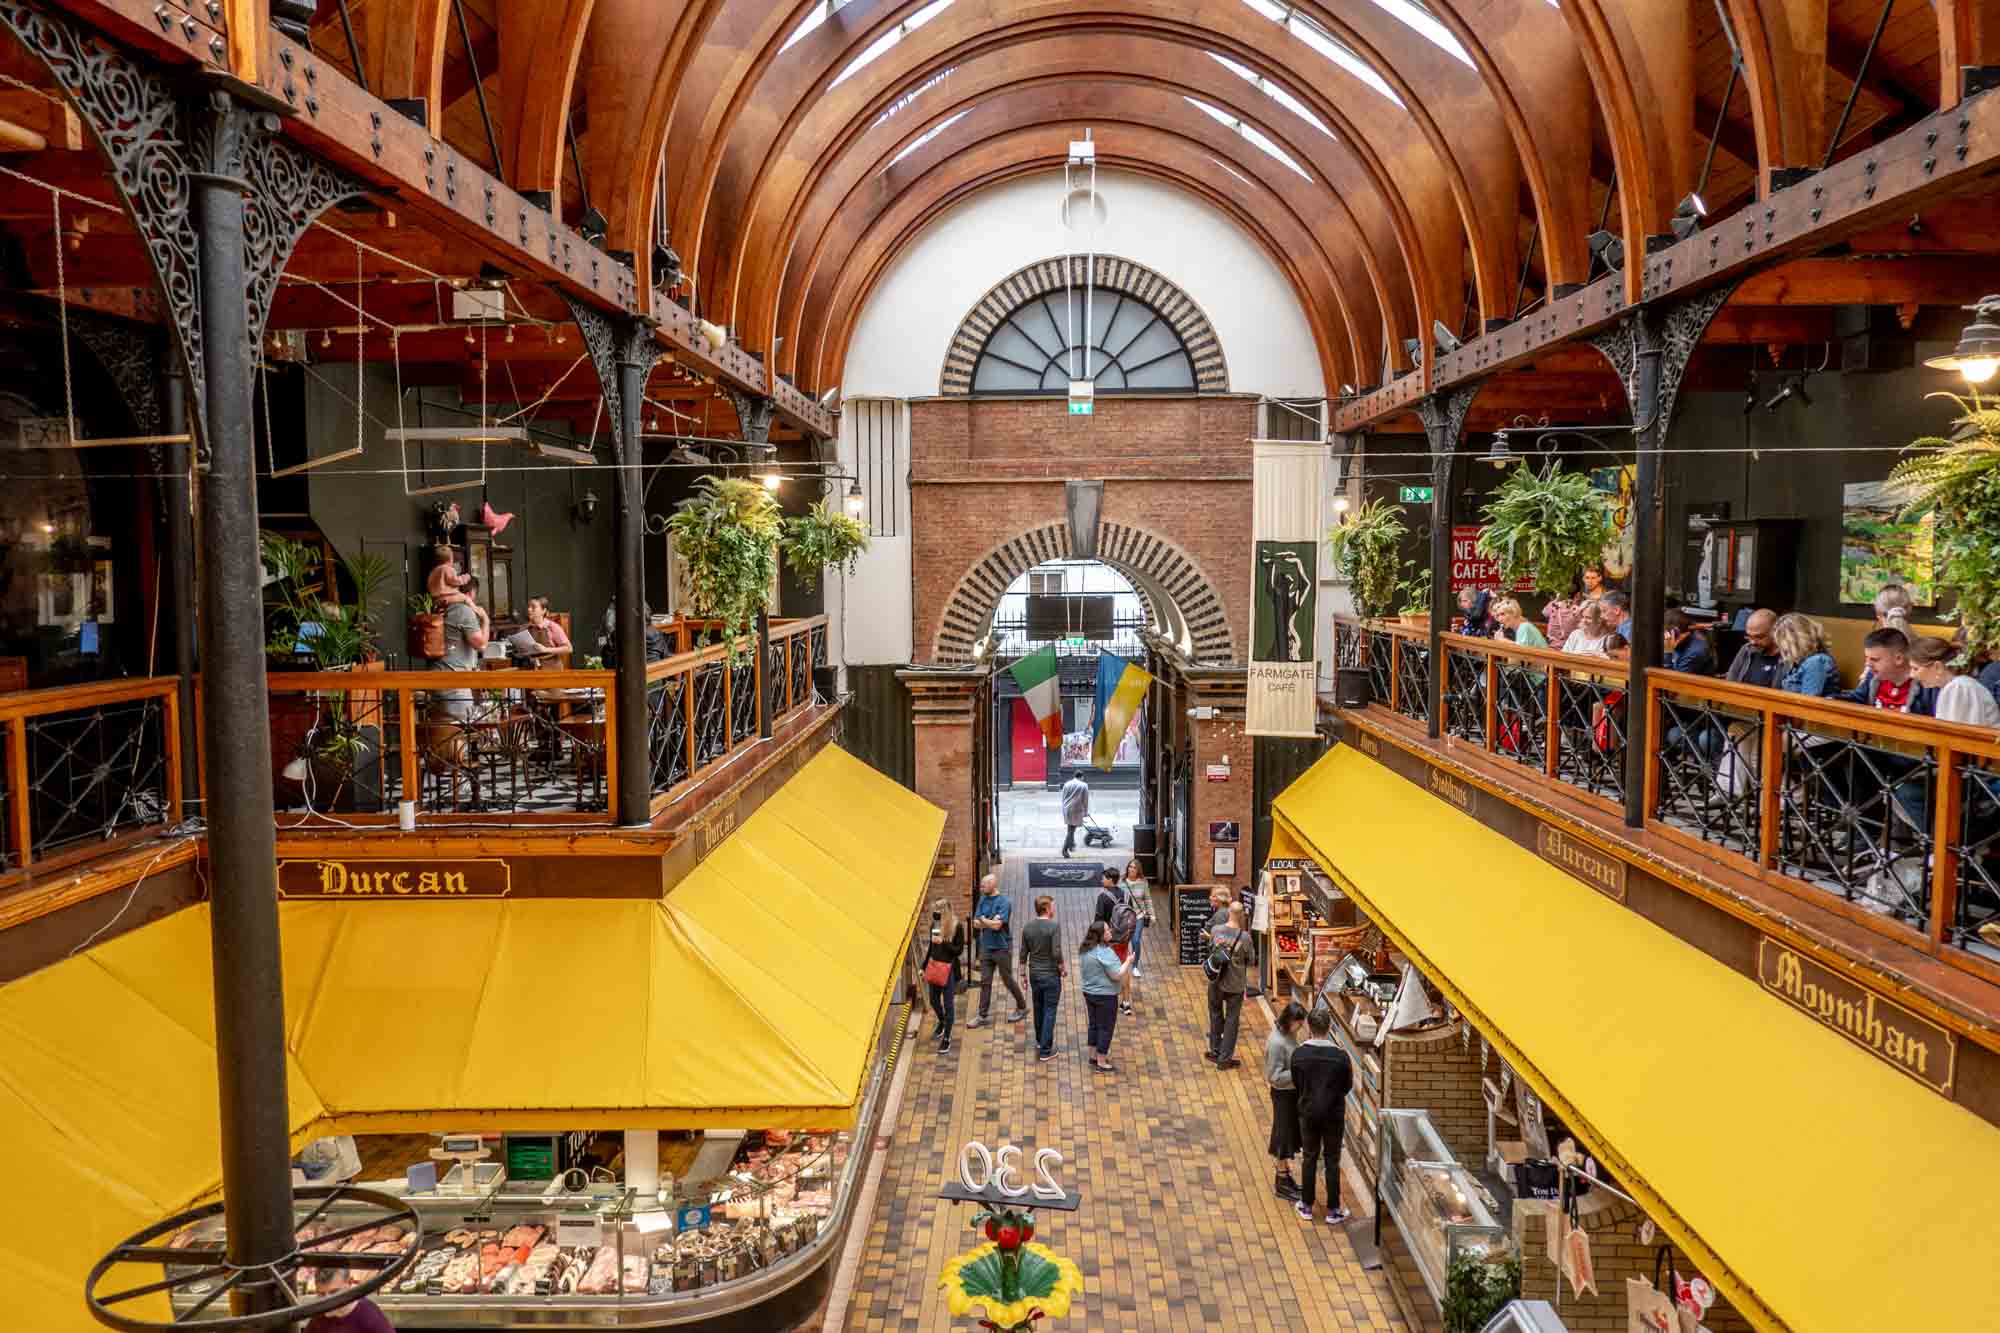 People shopping and eating in a 2-story covered market with yellow awnings